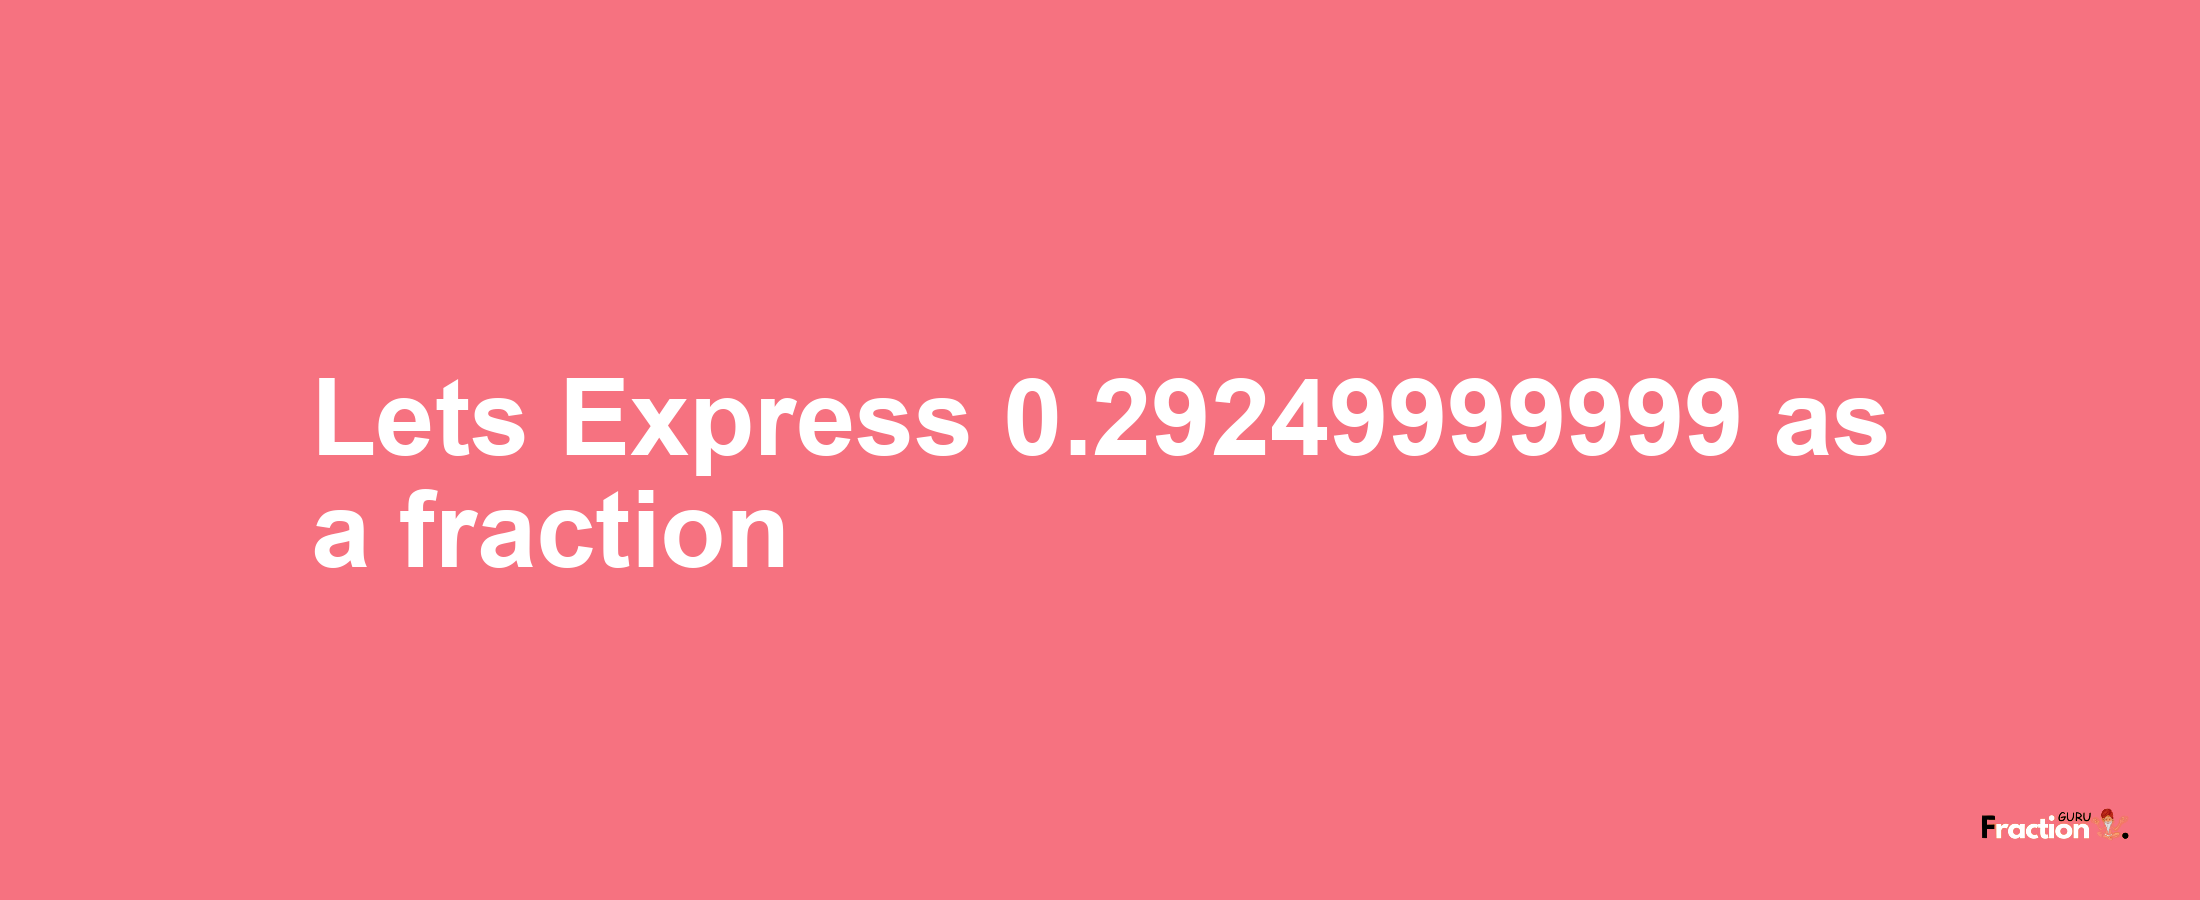 Lets Express 0.29249999999 as afraction